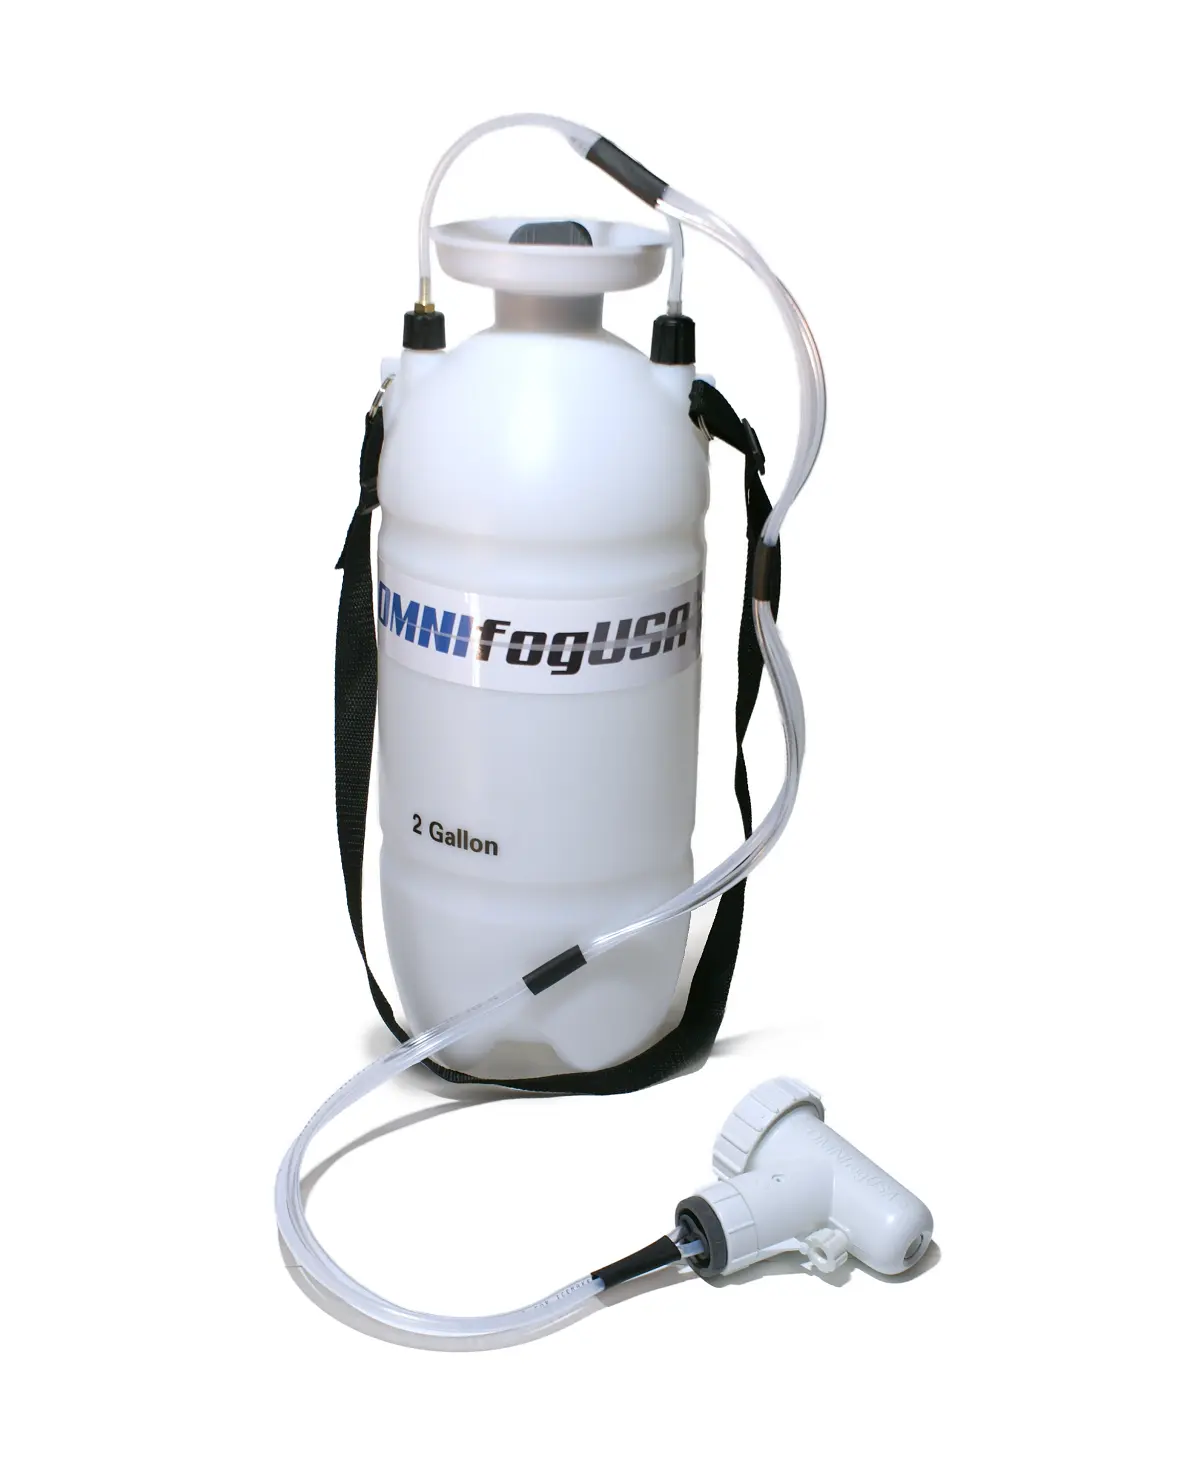 OmnifogUSA 2 Gallon Large Capacity Kit With Universal Blower And Designed To Spray